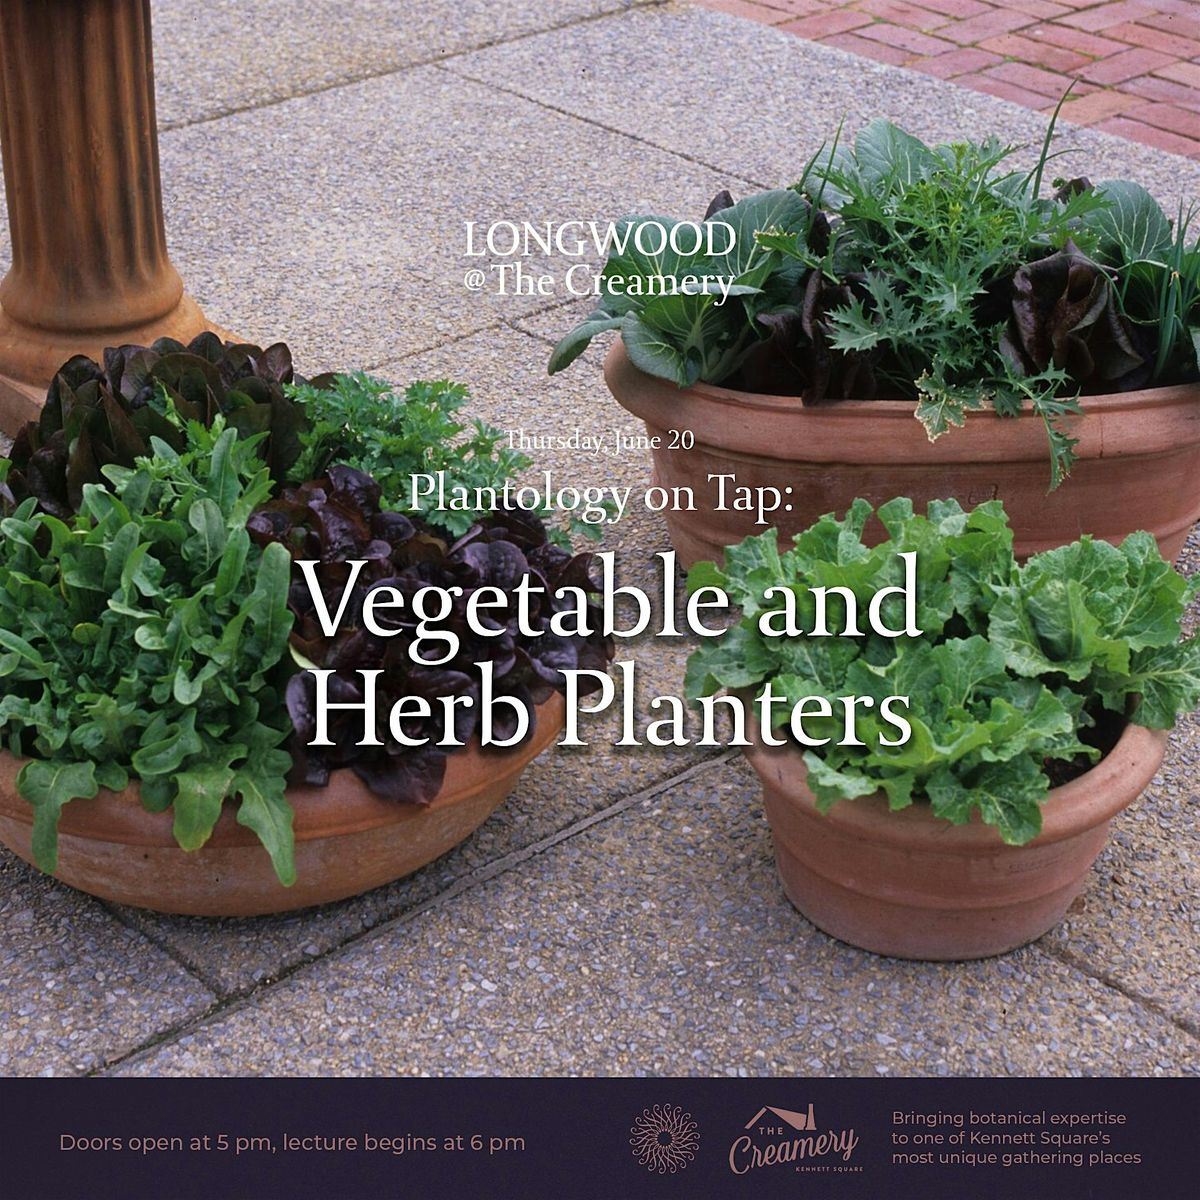 Longwood at The Creamery - Plantology on Tap - Vegetable and Herb Planters